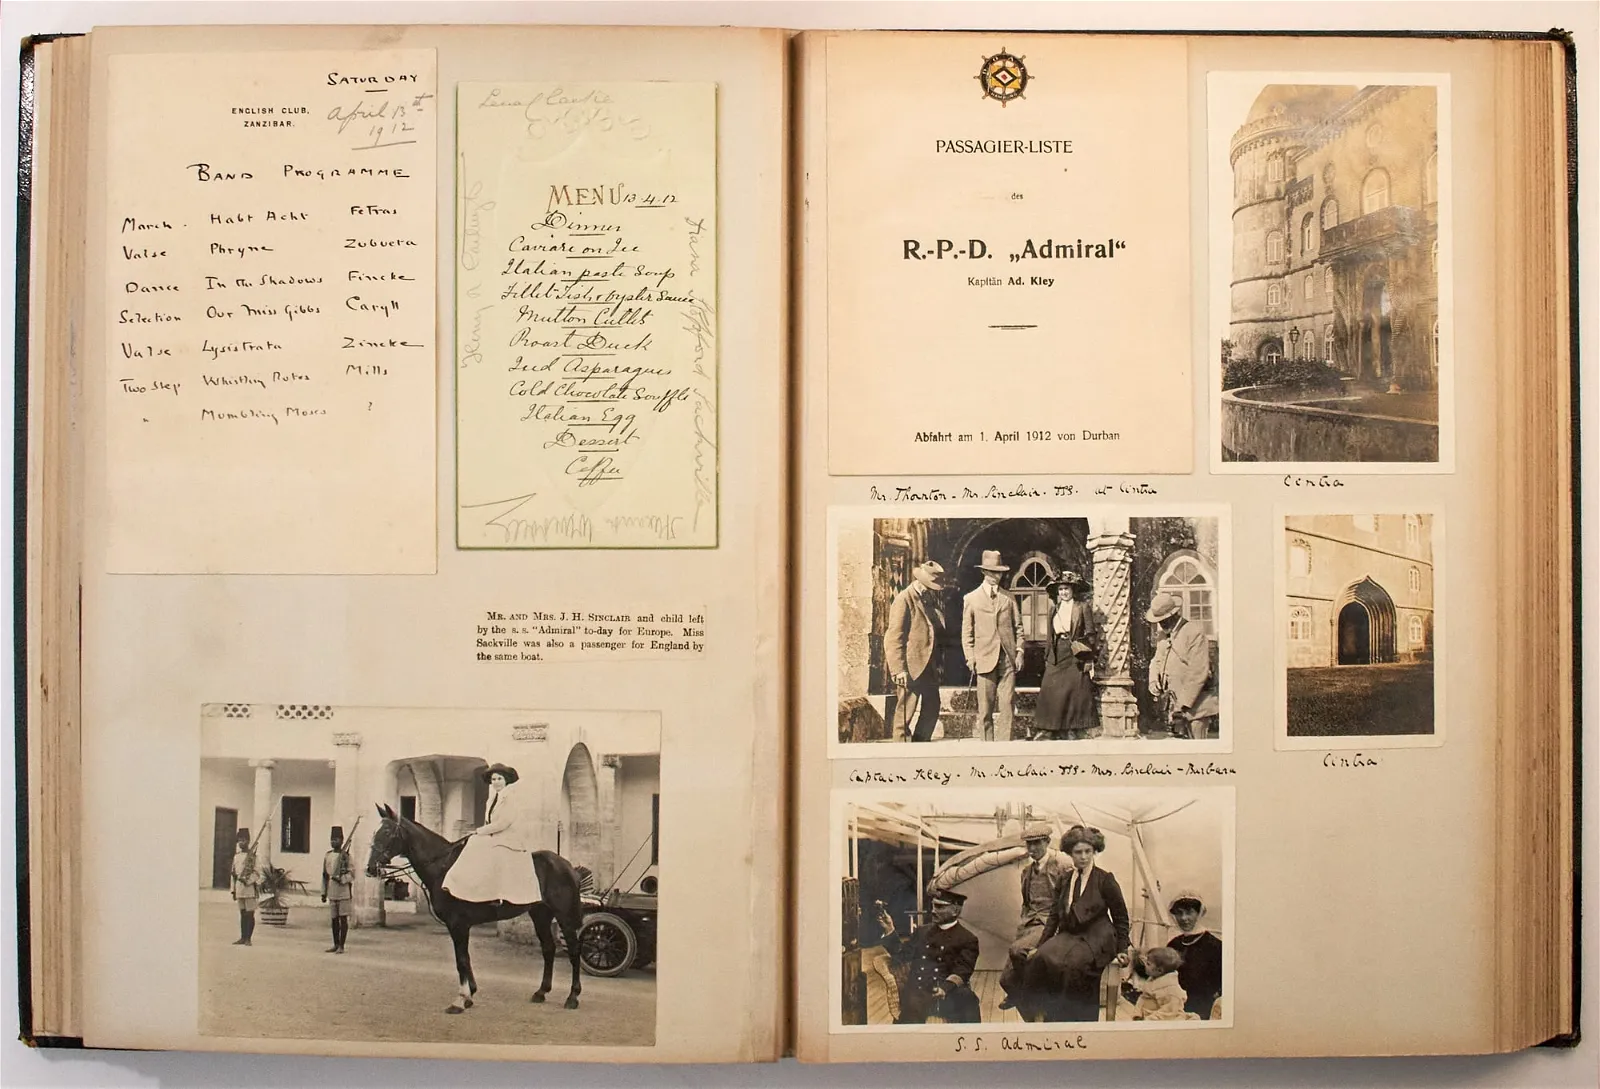 A memory album compiled by the staff or family of British Consul-General Edward Clarke, 1910-1911 Zanzibar; $9,500 ($12,445 with buyer’s premium) at Doyle.